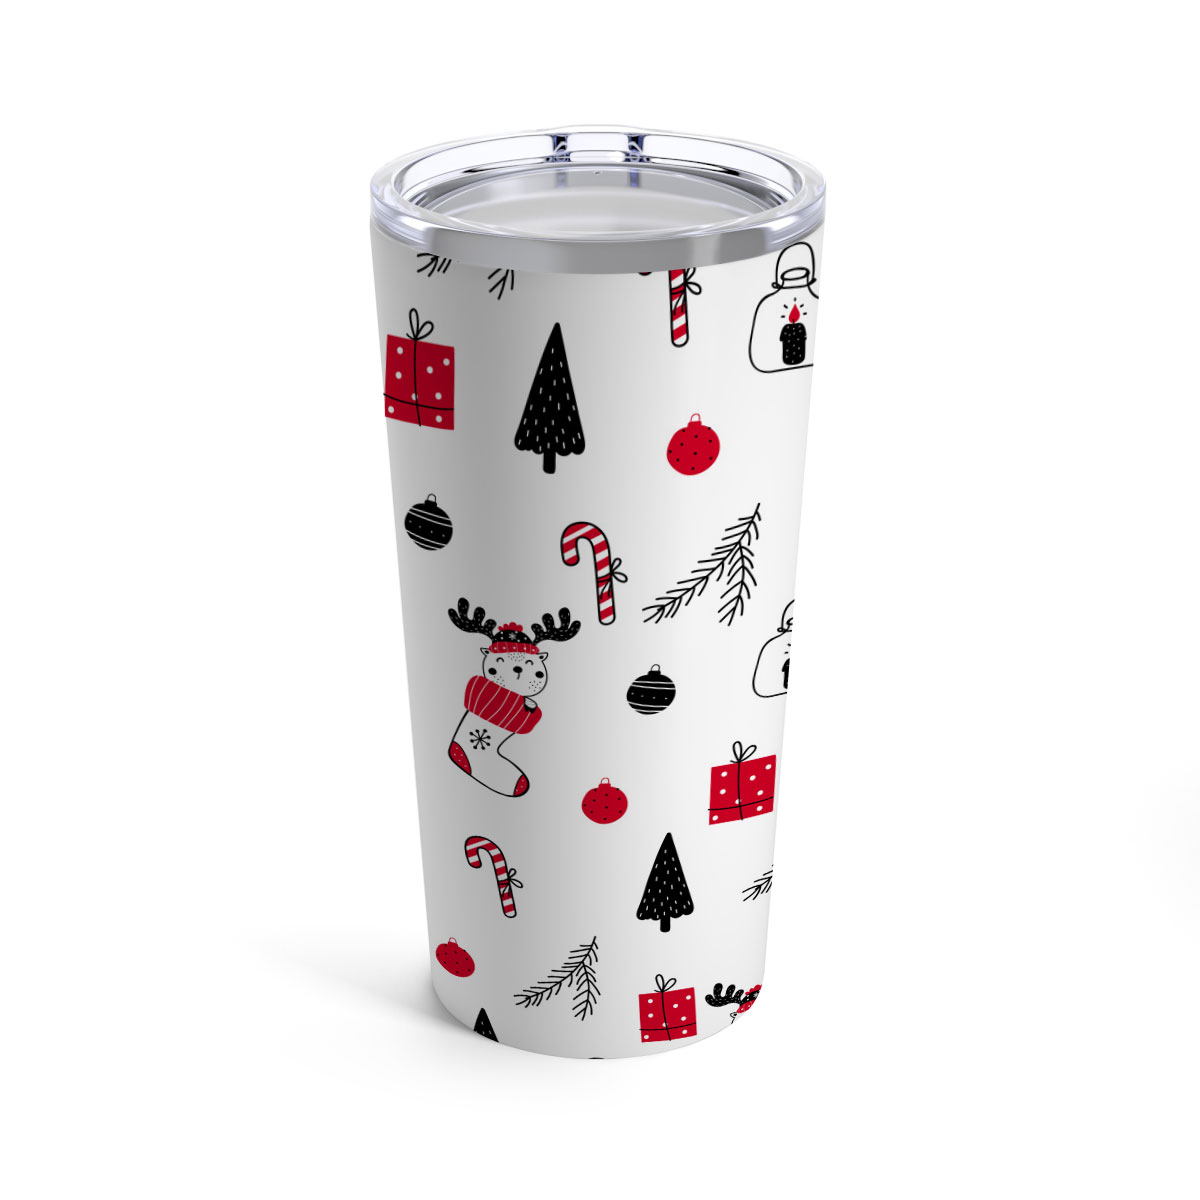 Reindeer Clipart In Hand Drawn Red Socks, Christmas Balls, Candy Canes, And Christmas Gifts Seamless White Pattern Tumbler 20oz